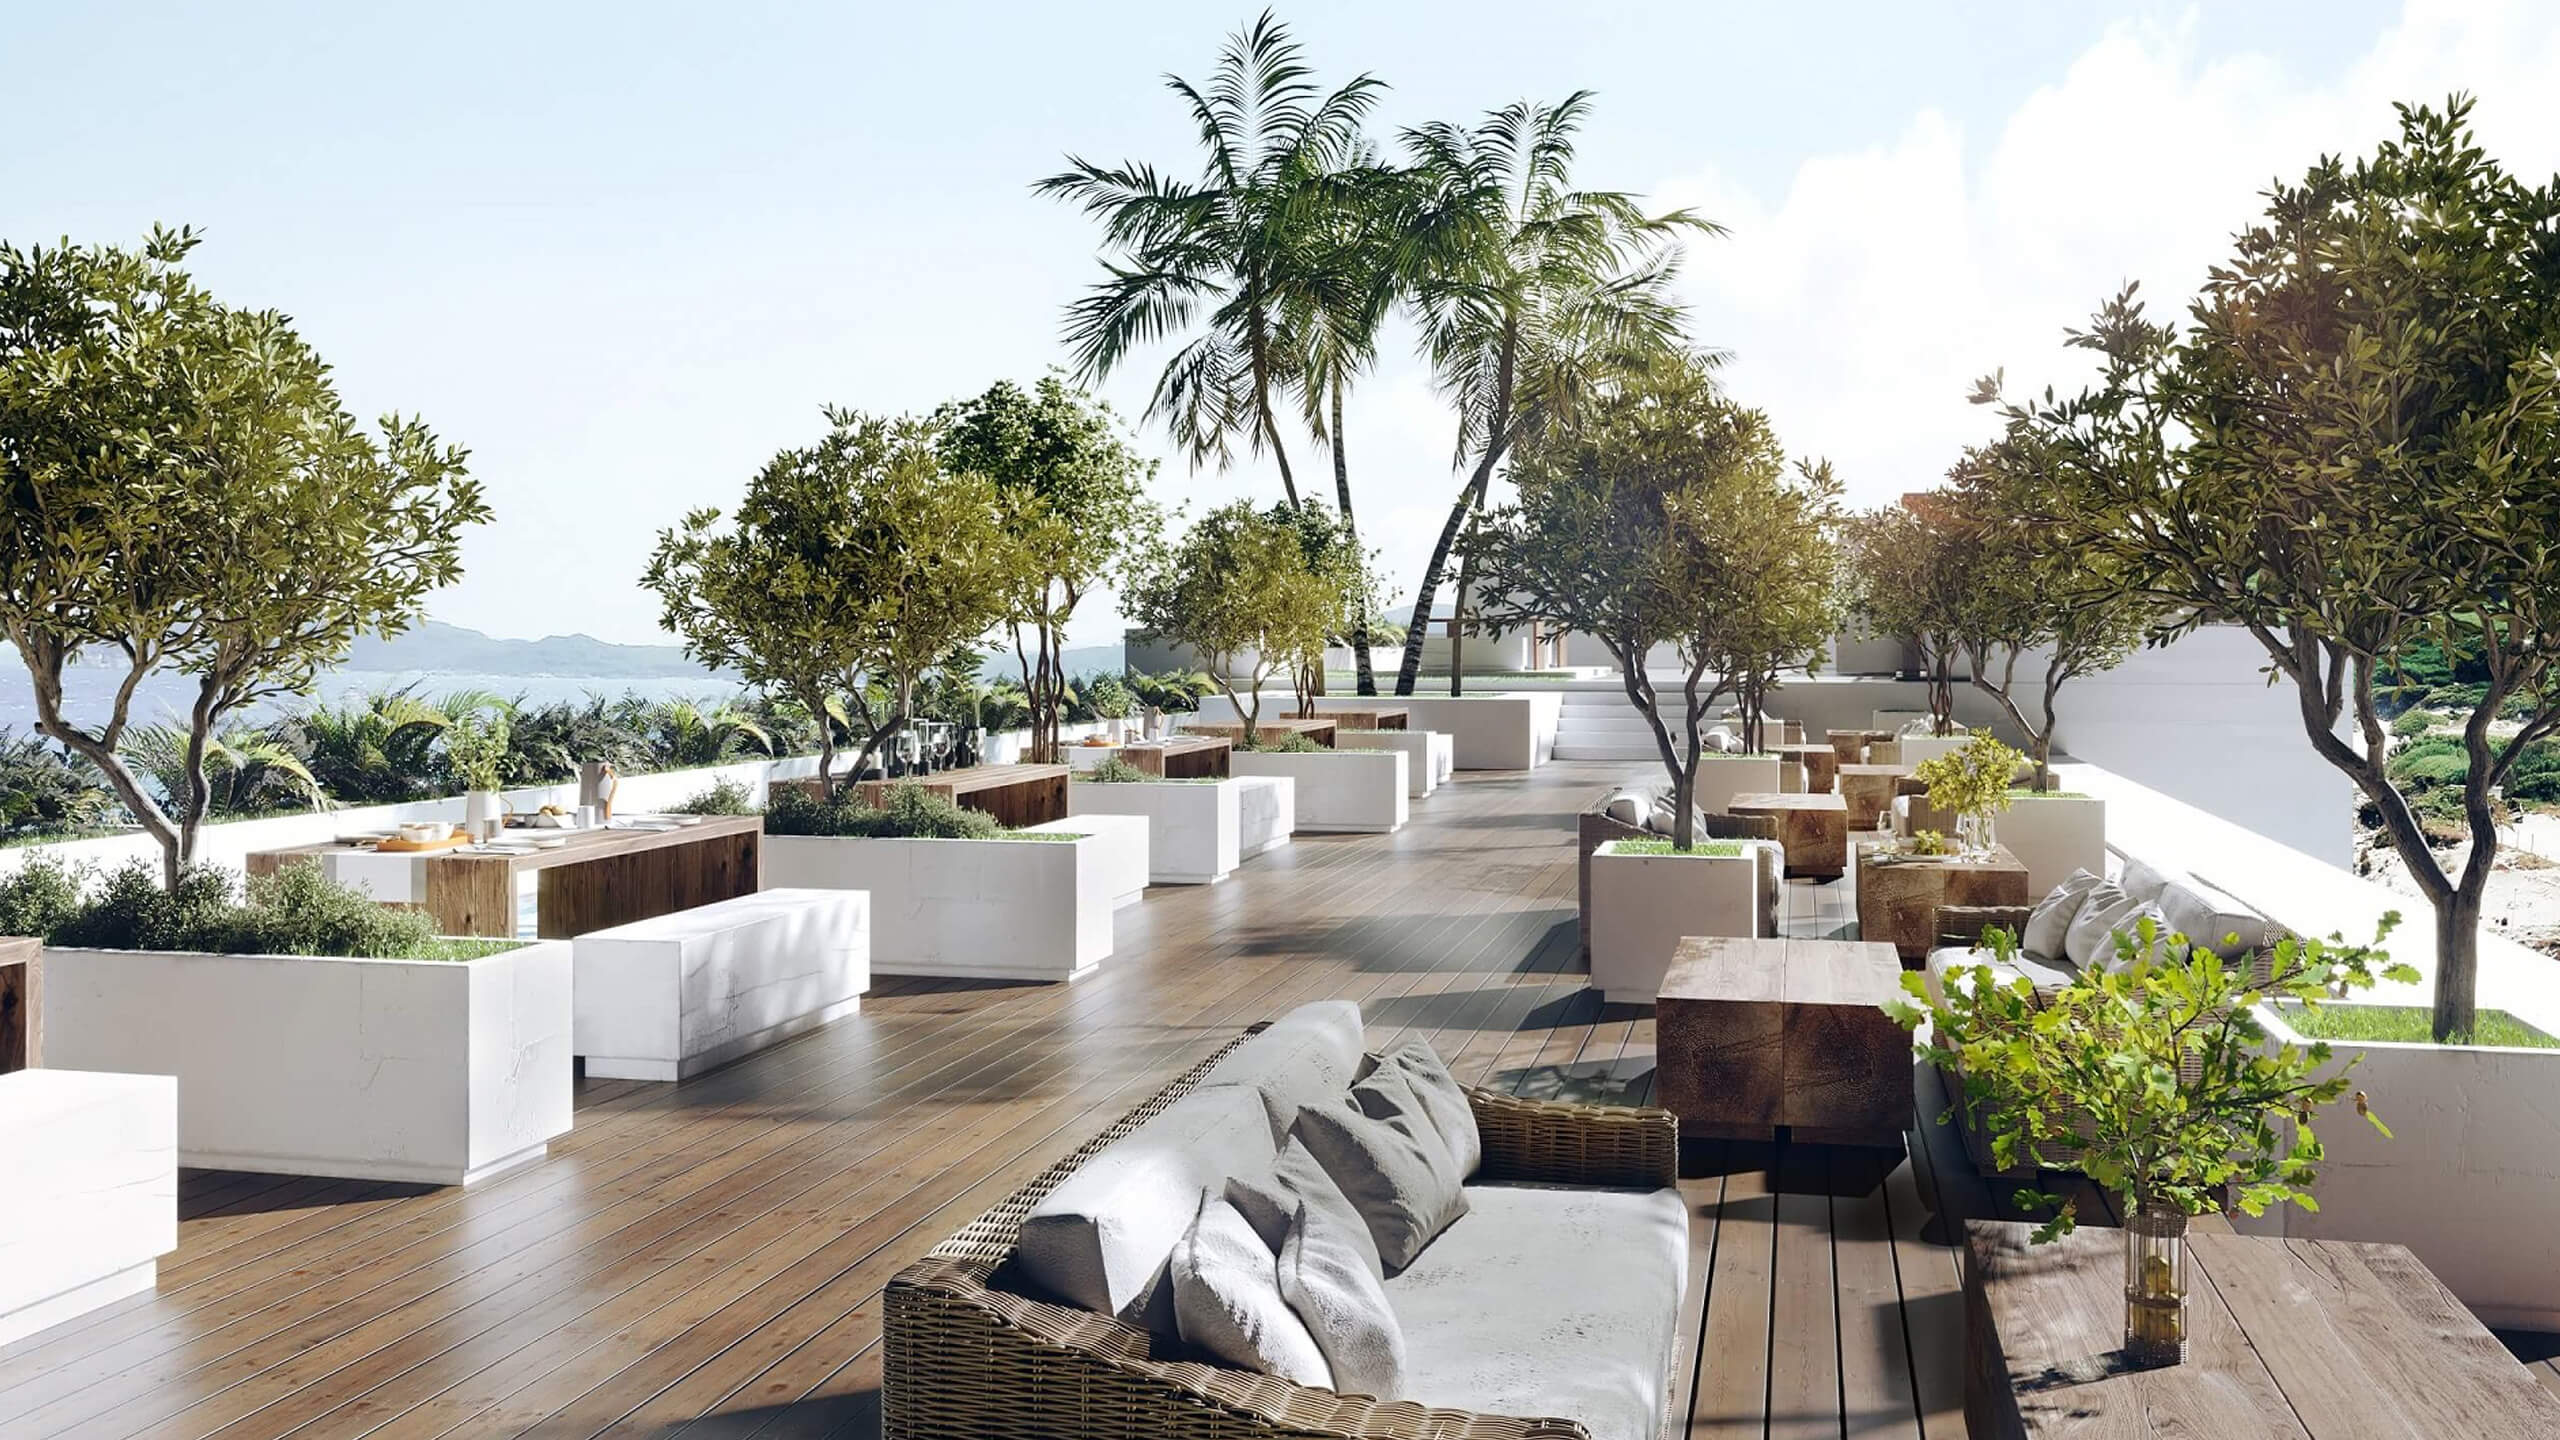 3D Rendering of Hotel Common Areas: Terrace